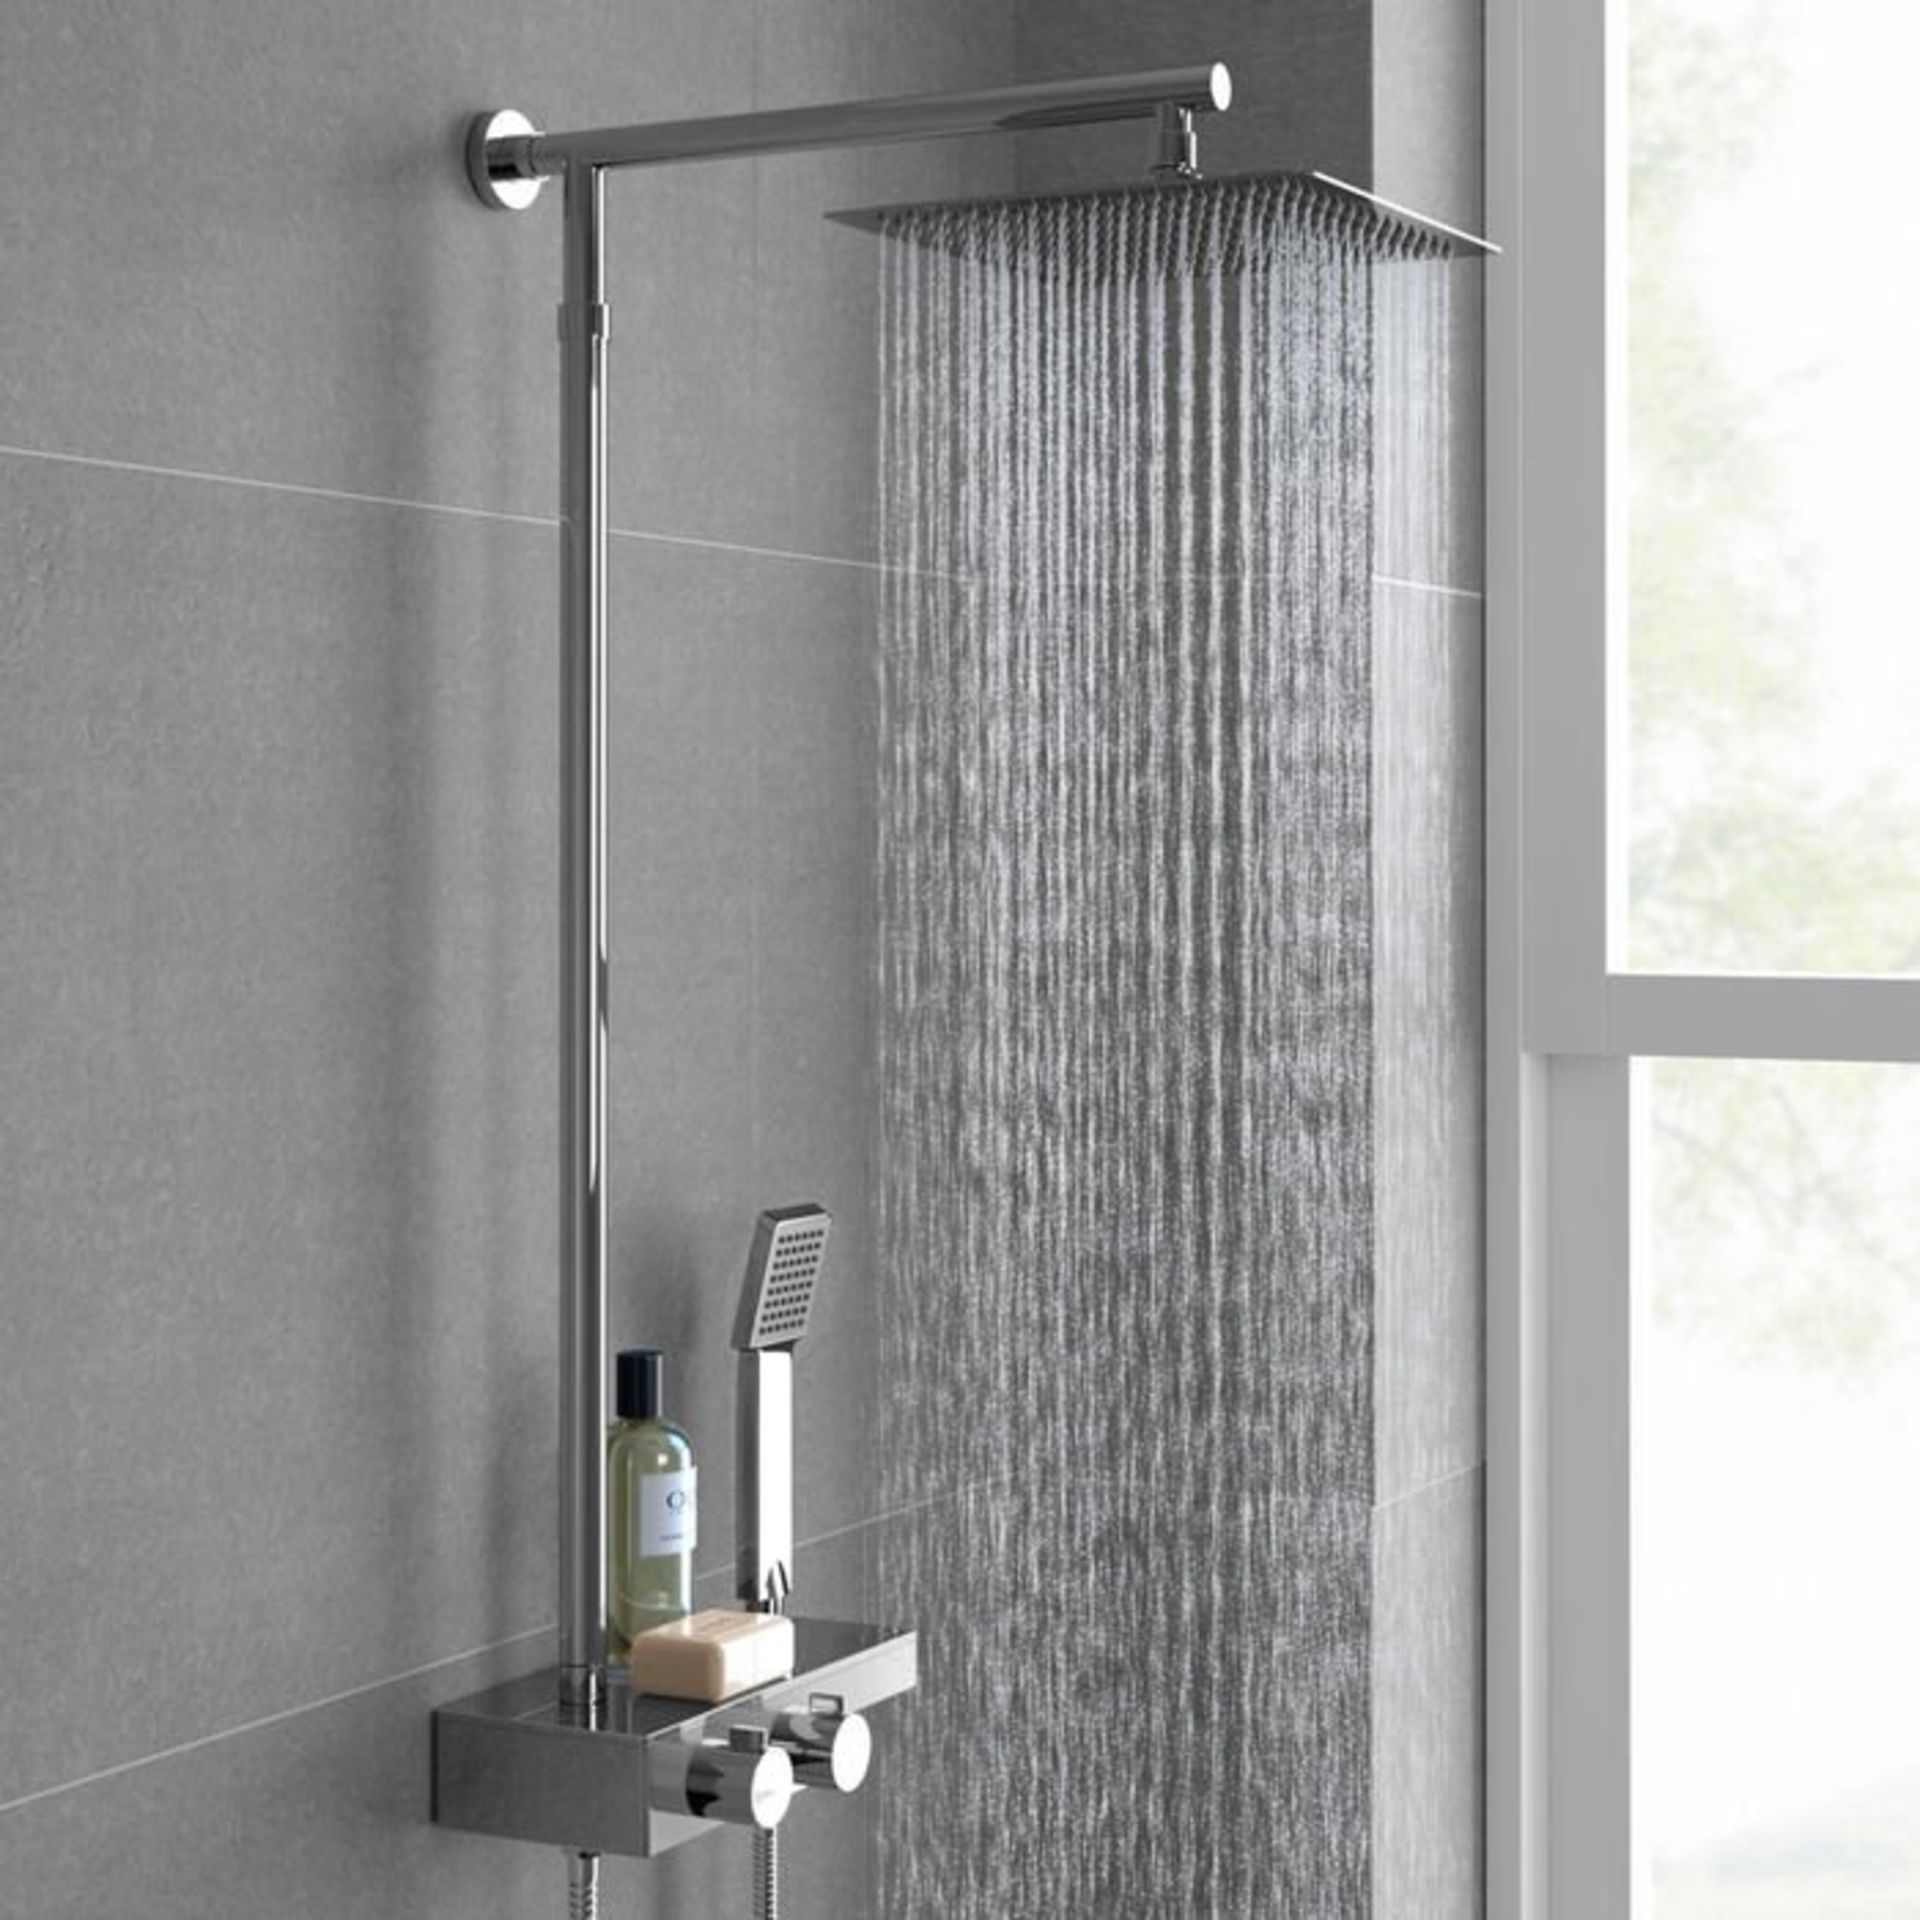 (J155) Thermostatic Exposed Shower Kit 250mm Square Head Handheld. We love this because it creates a